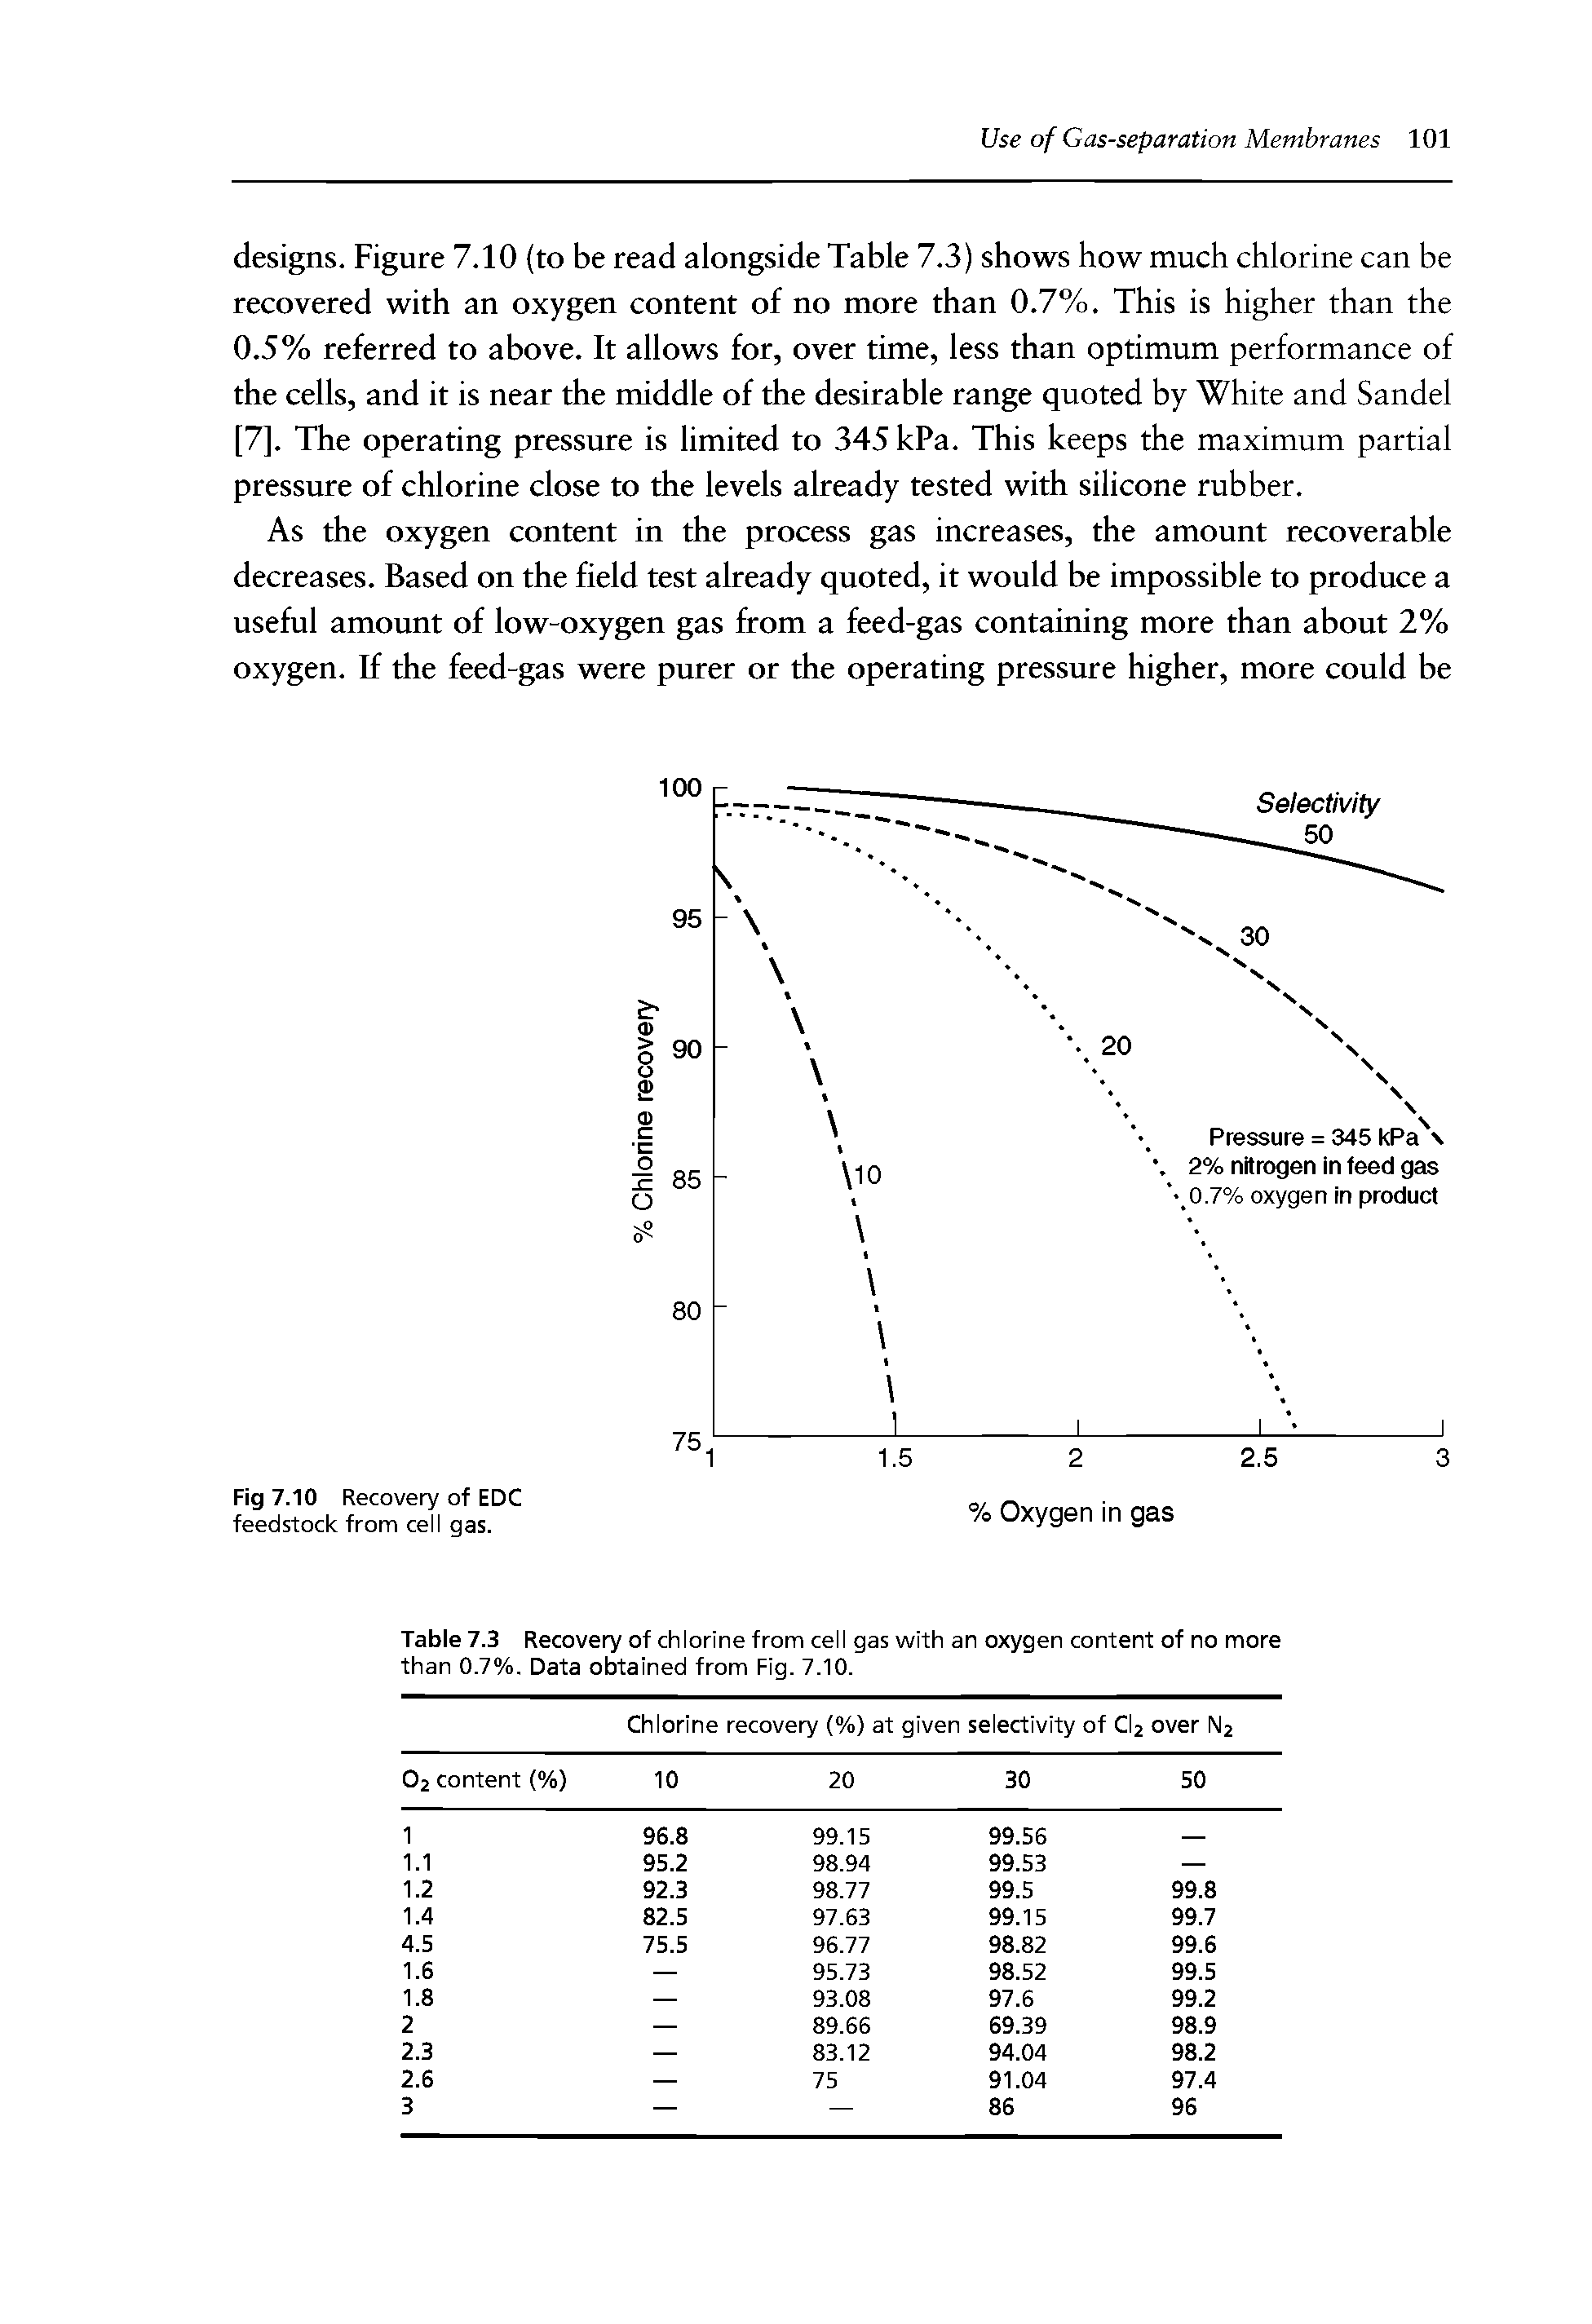 Table 7.3 Recovery of chlorine from cell gas with an oxygen content of no more than 0.7%. Data obtained from Fig. 7.10.